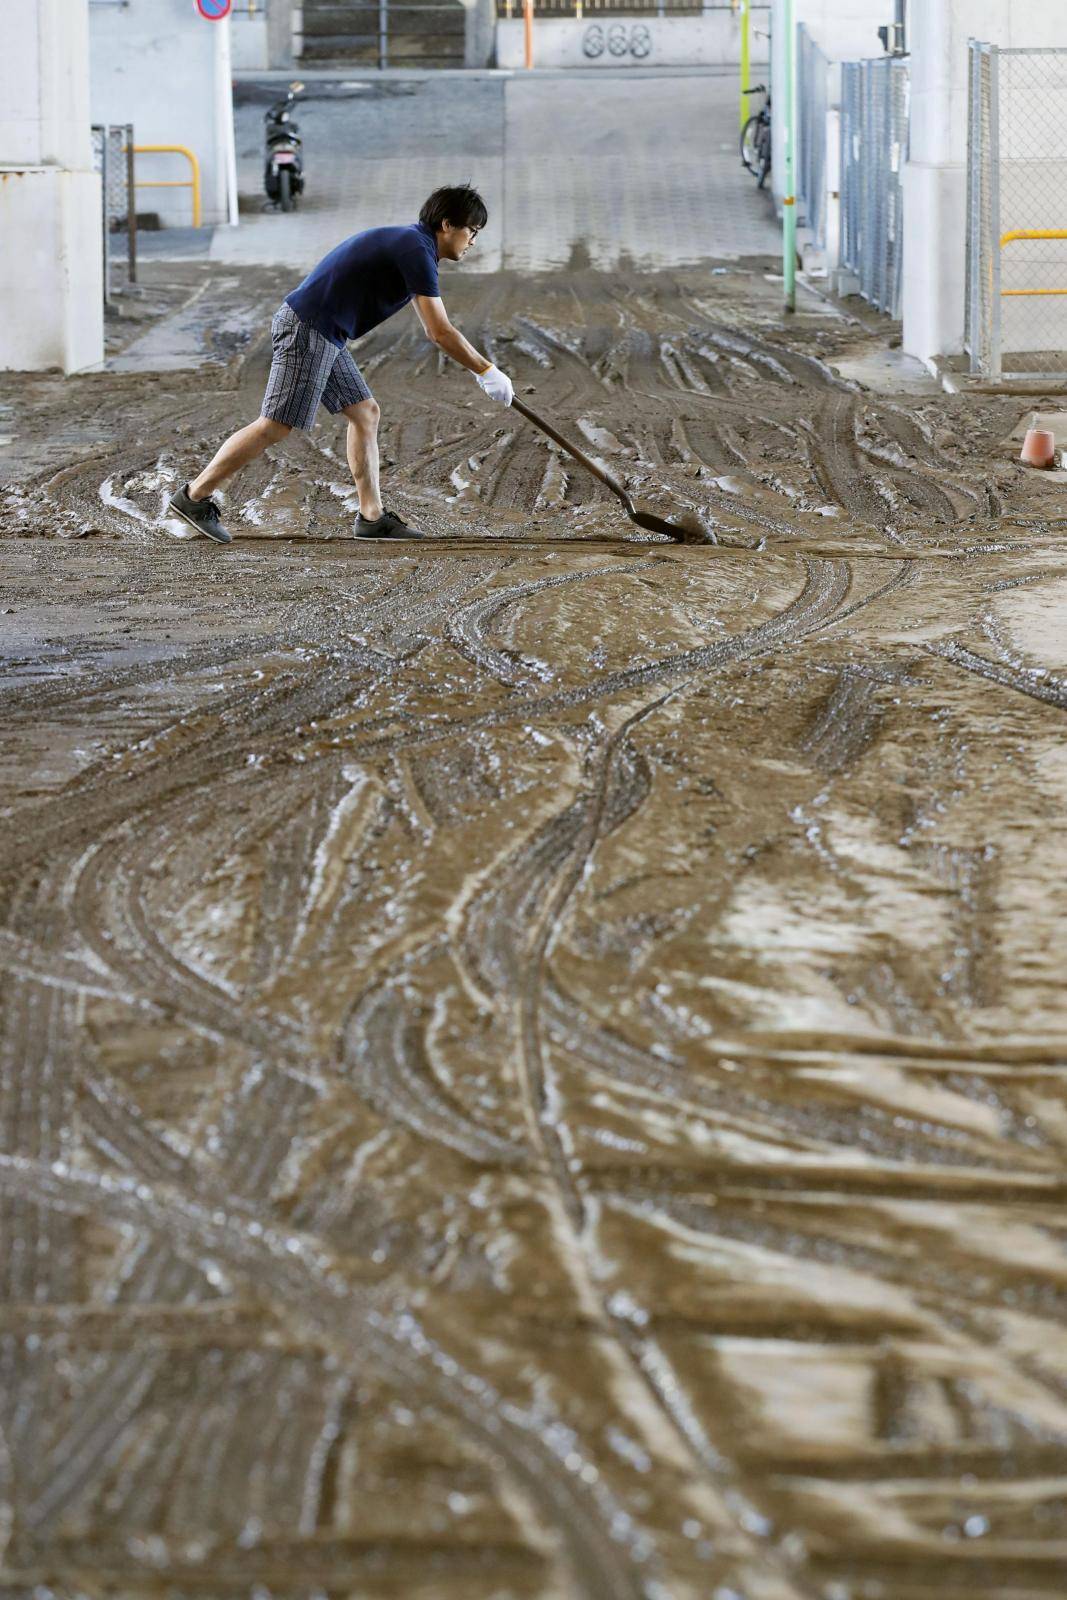 A local resident cleans an area affected by the flood caused by Typhoon Hagibis at Setagaya ward in Tokyo